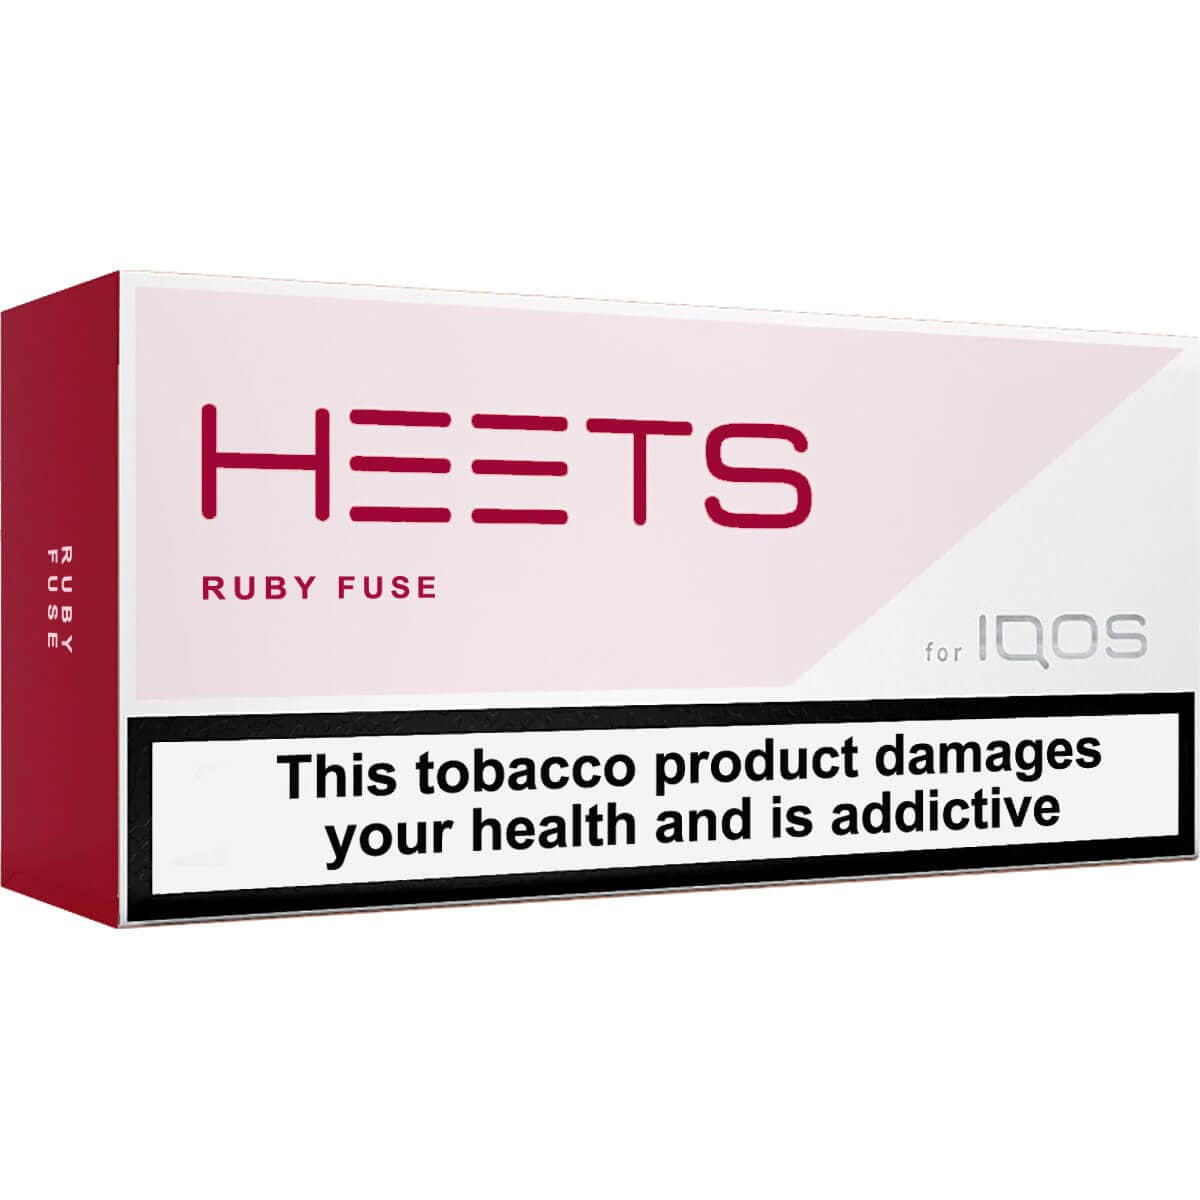 Heets – Ruby Fuse